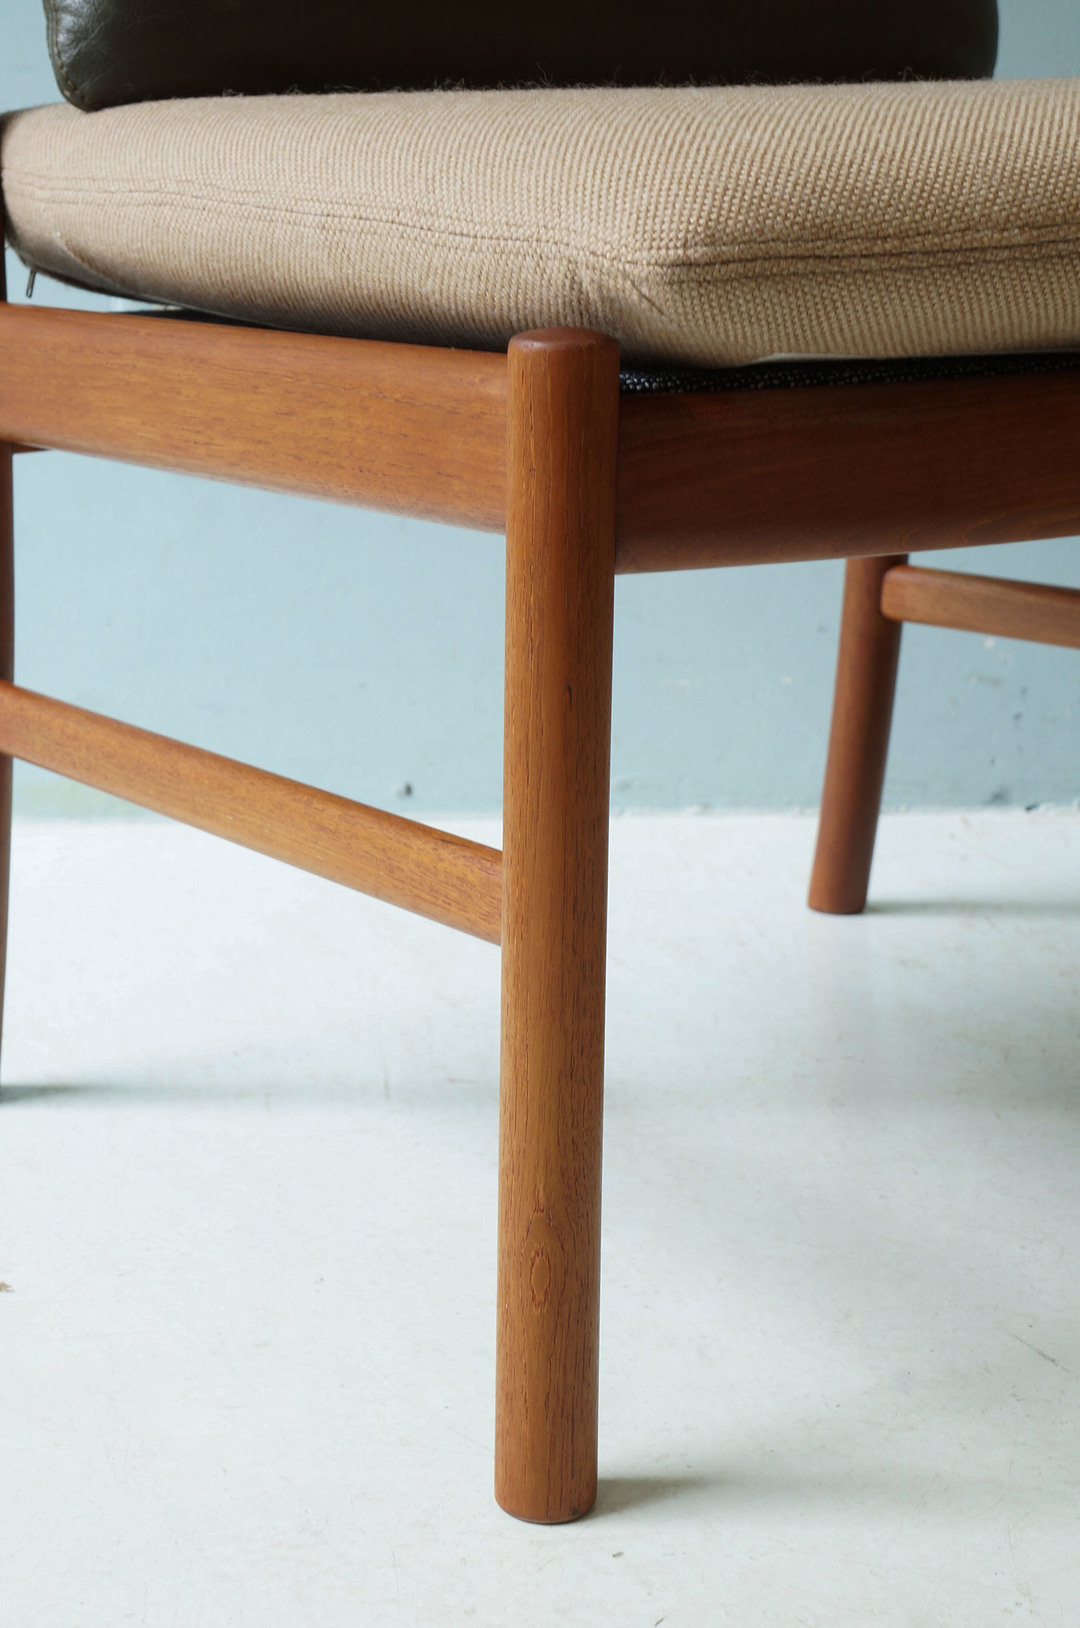 Japanese Vintage HITA CRAFTS Dining Chair Armless/日田工芸 ダイニングチェア アームレス ジャパンヴィンテージ チーク材 2